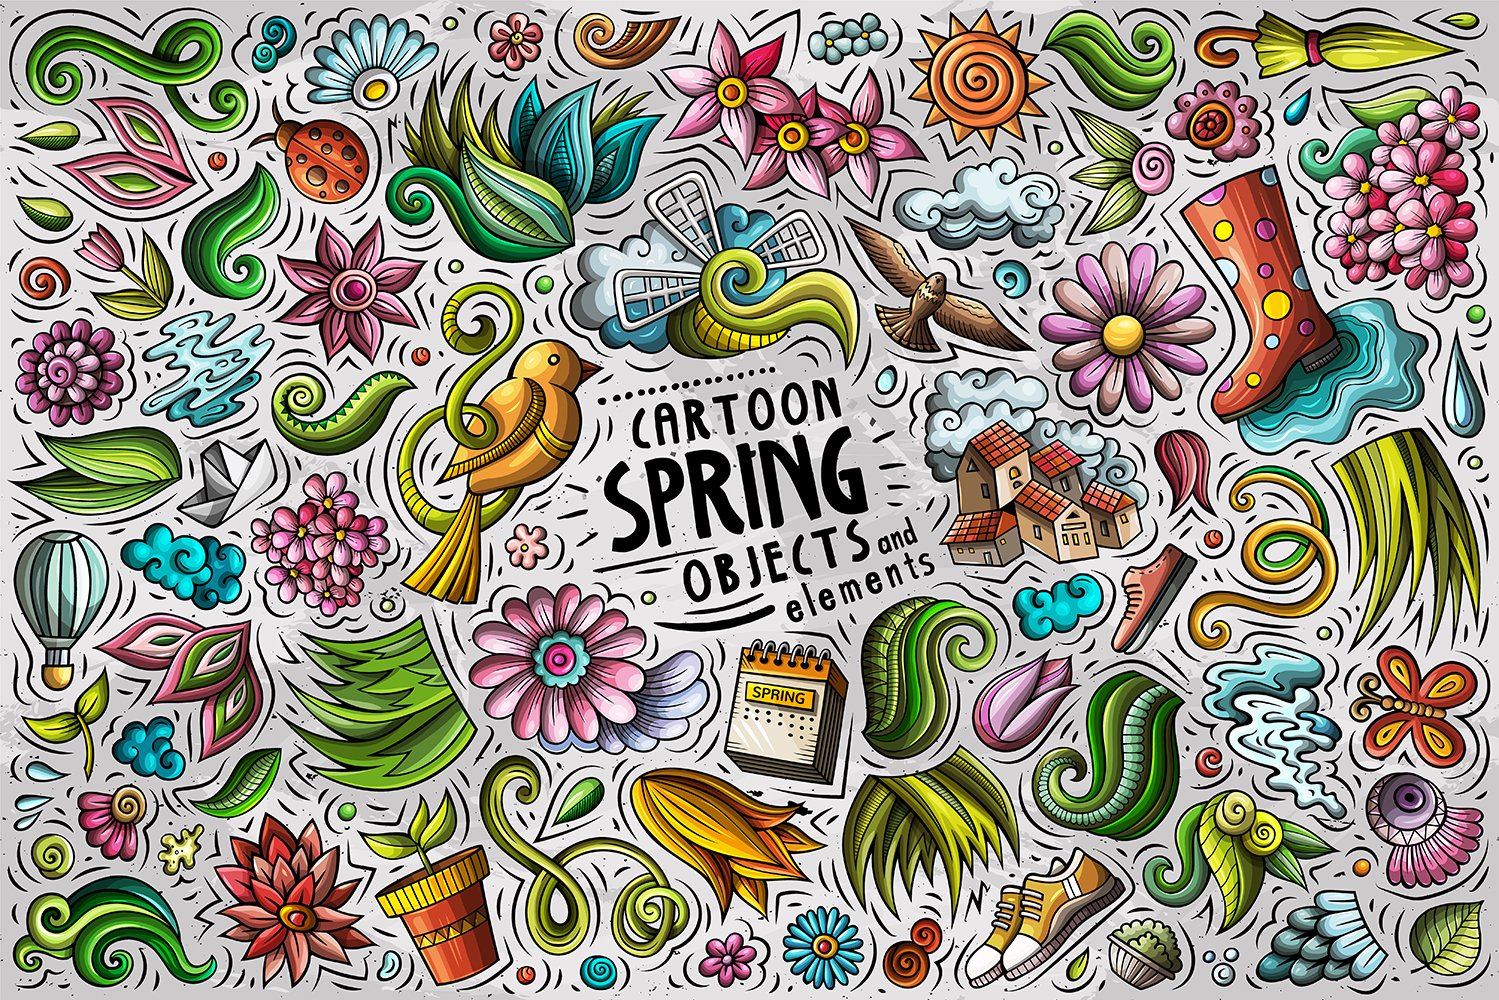 Spring Season Cartoon Objects and Symbols Collection